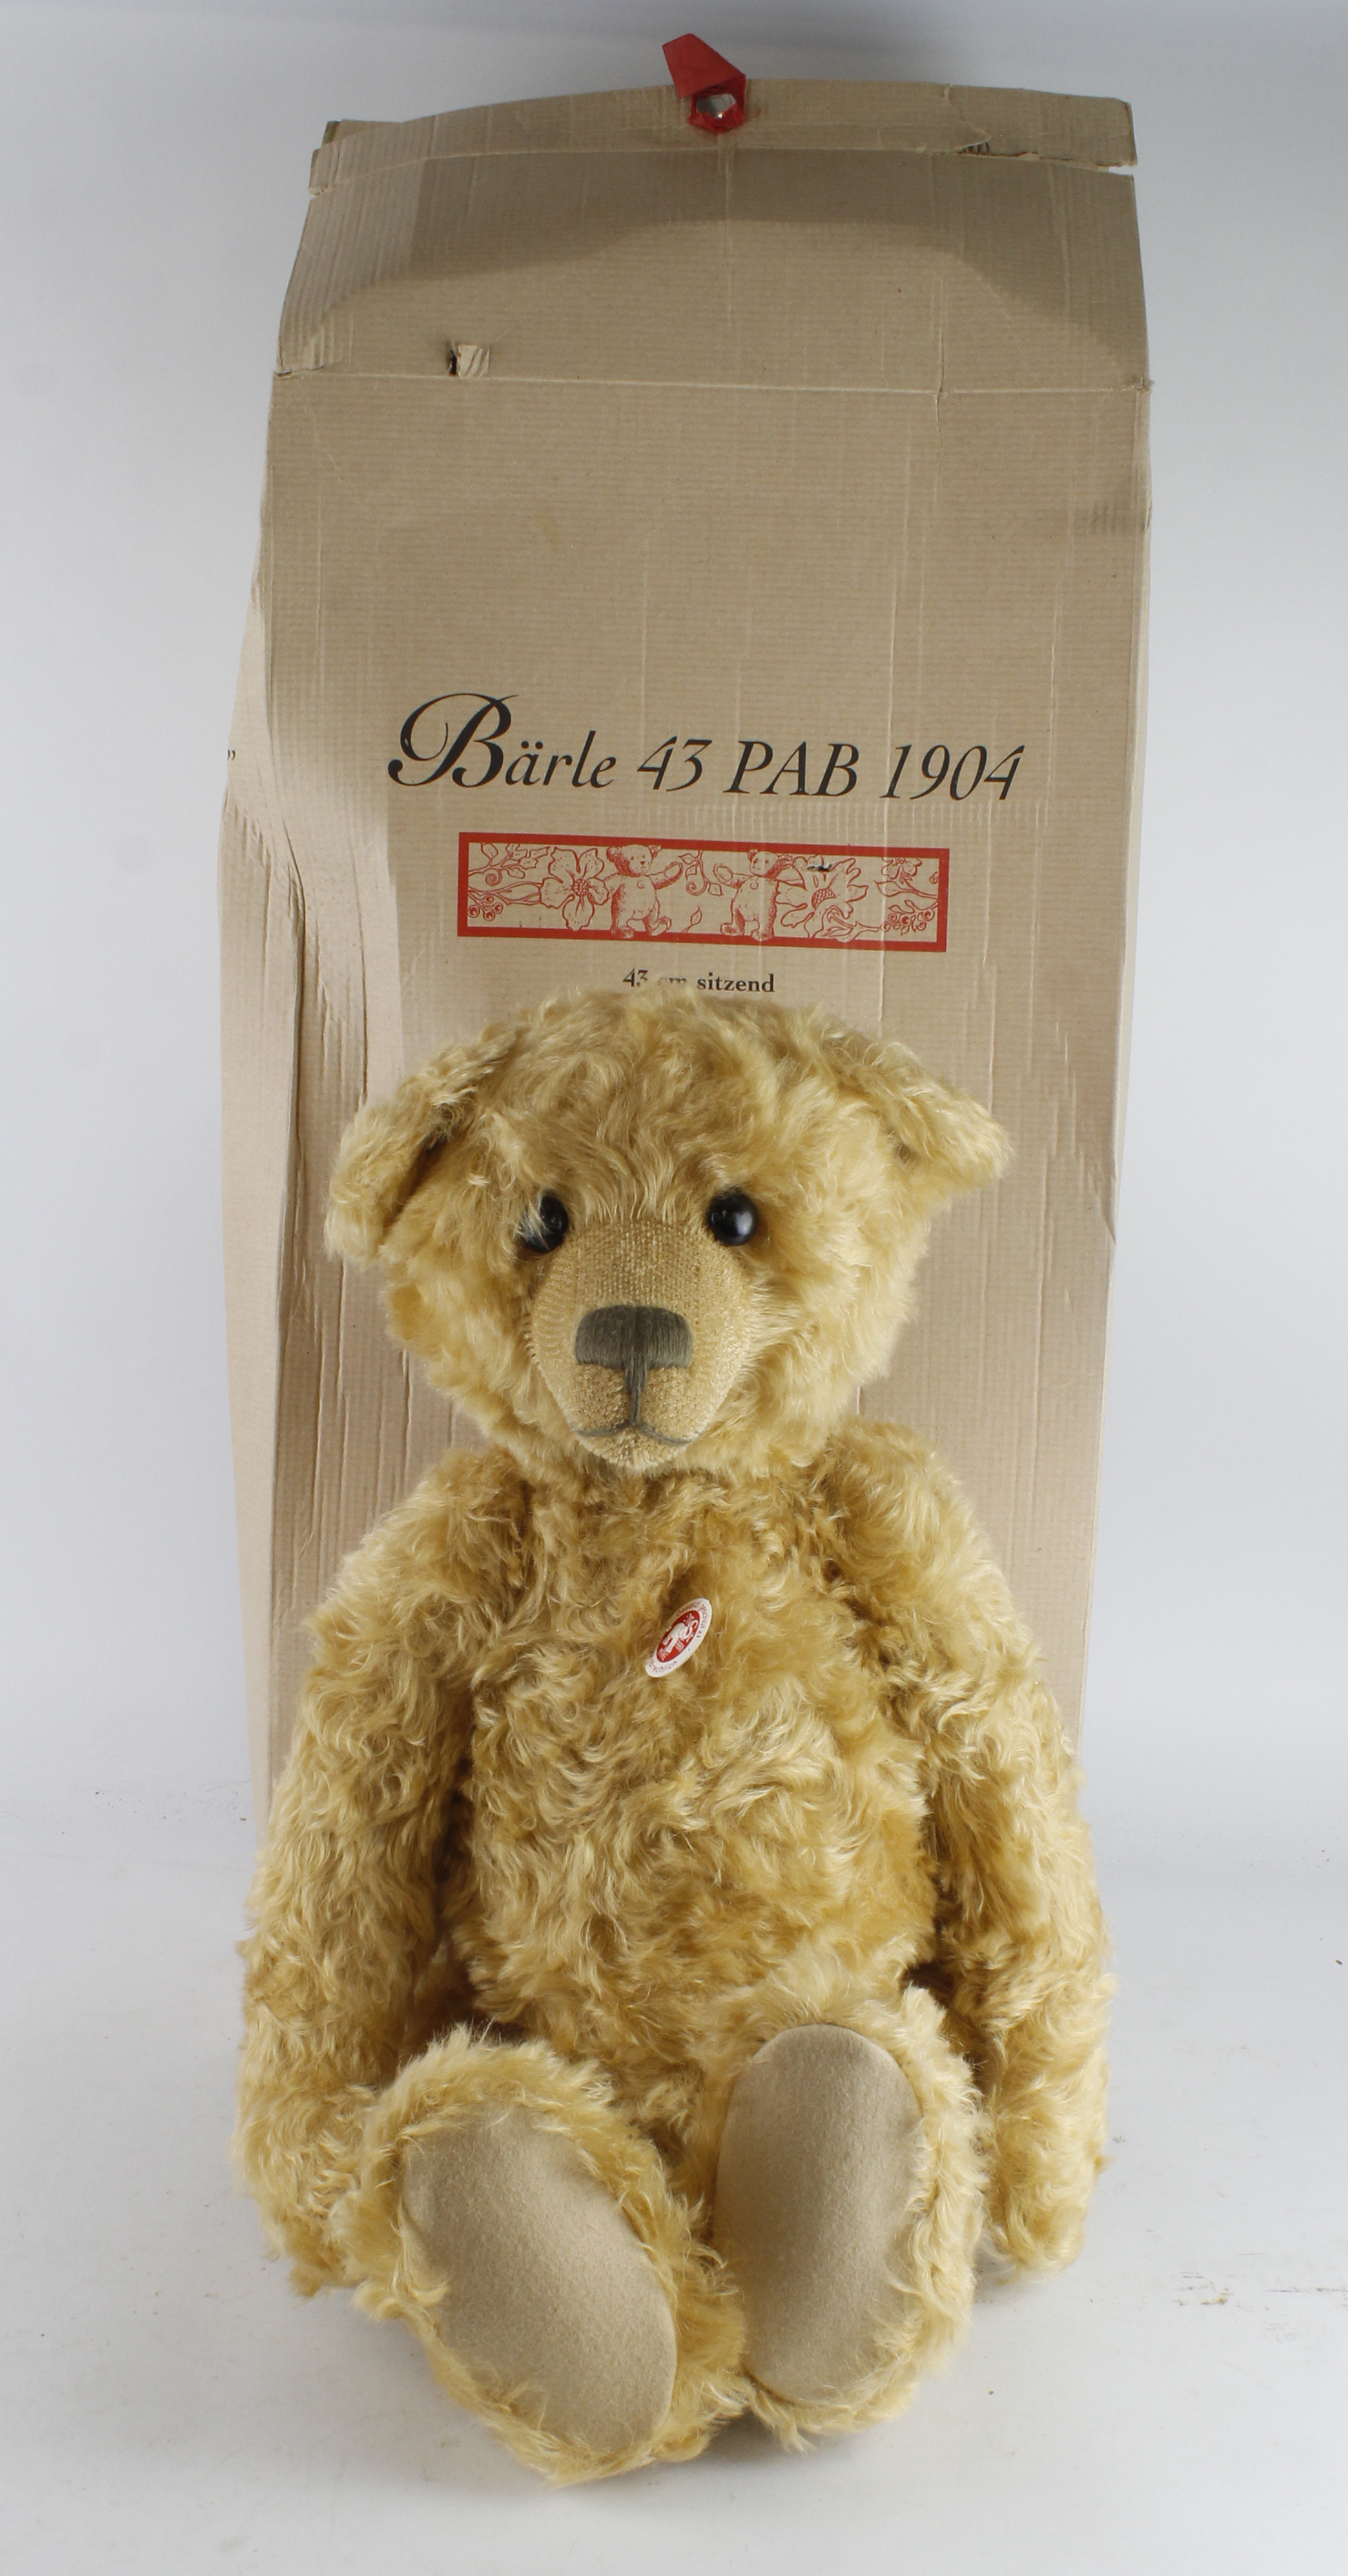 Steiff. A large Steiff limited edition Baerle 43 PAB 1904 bear, with certificate (no. 1021),